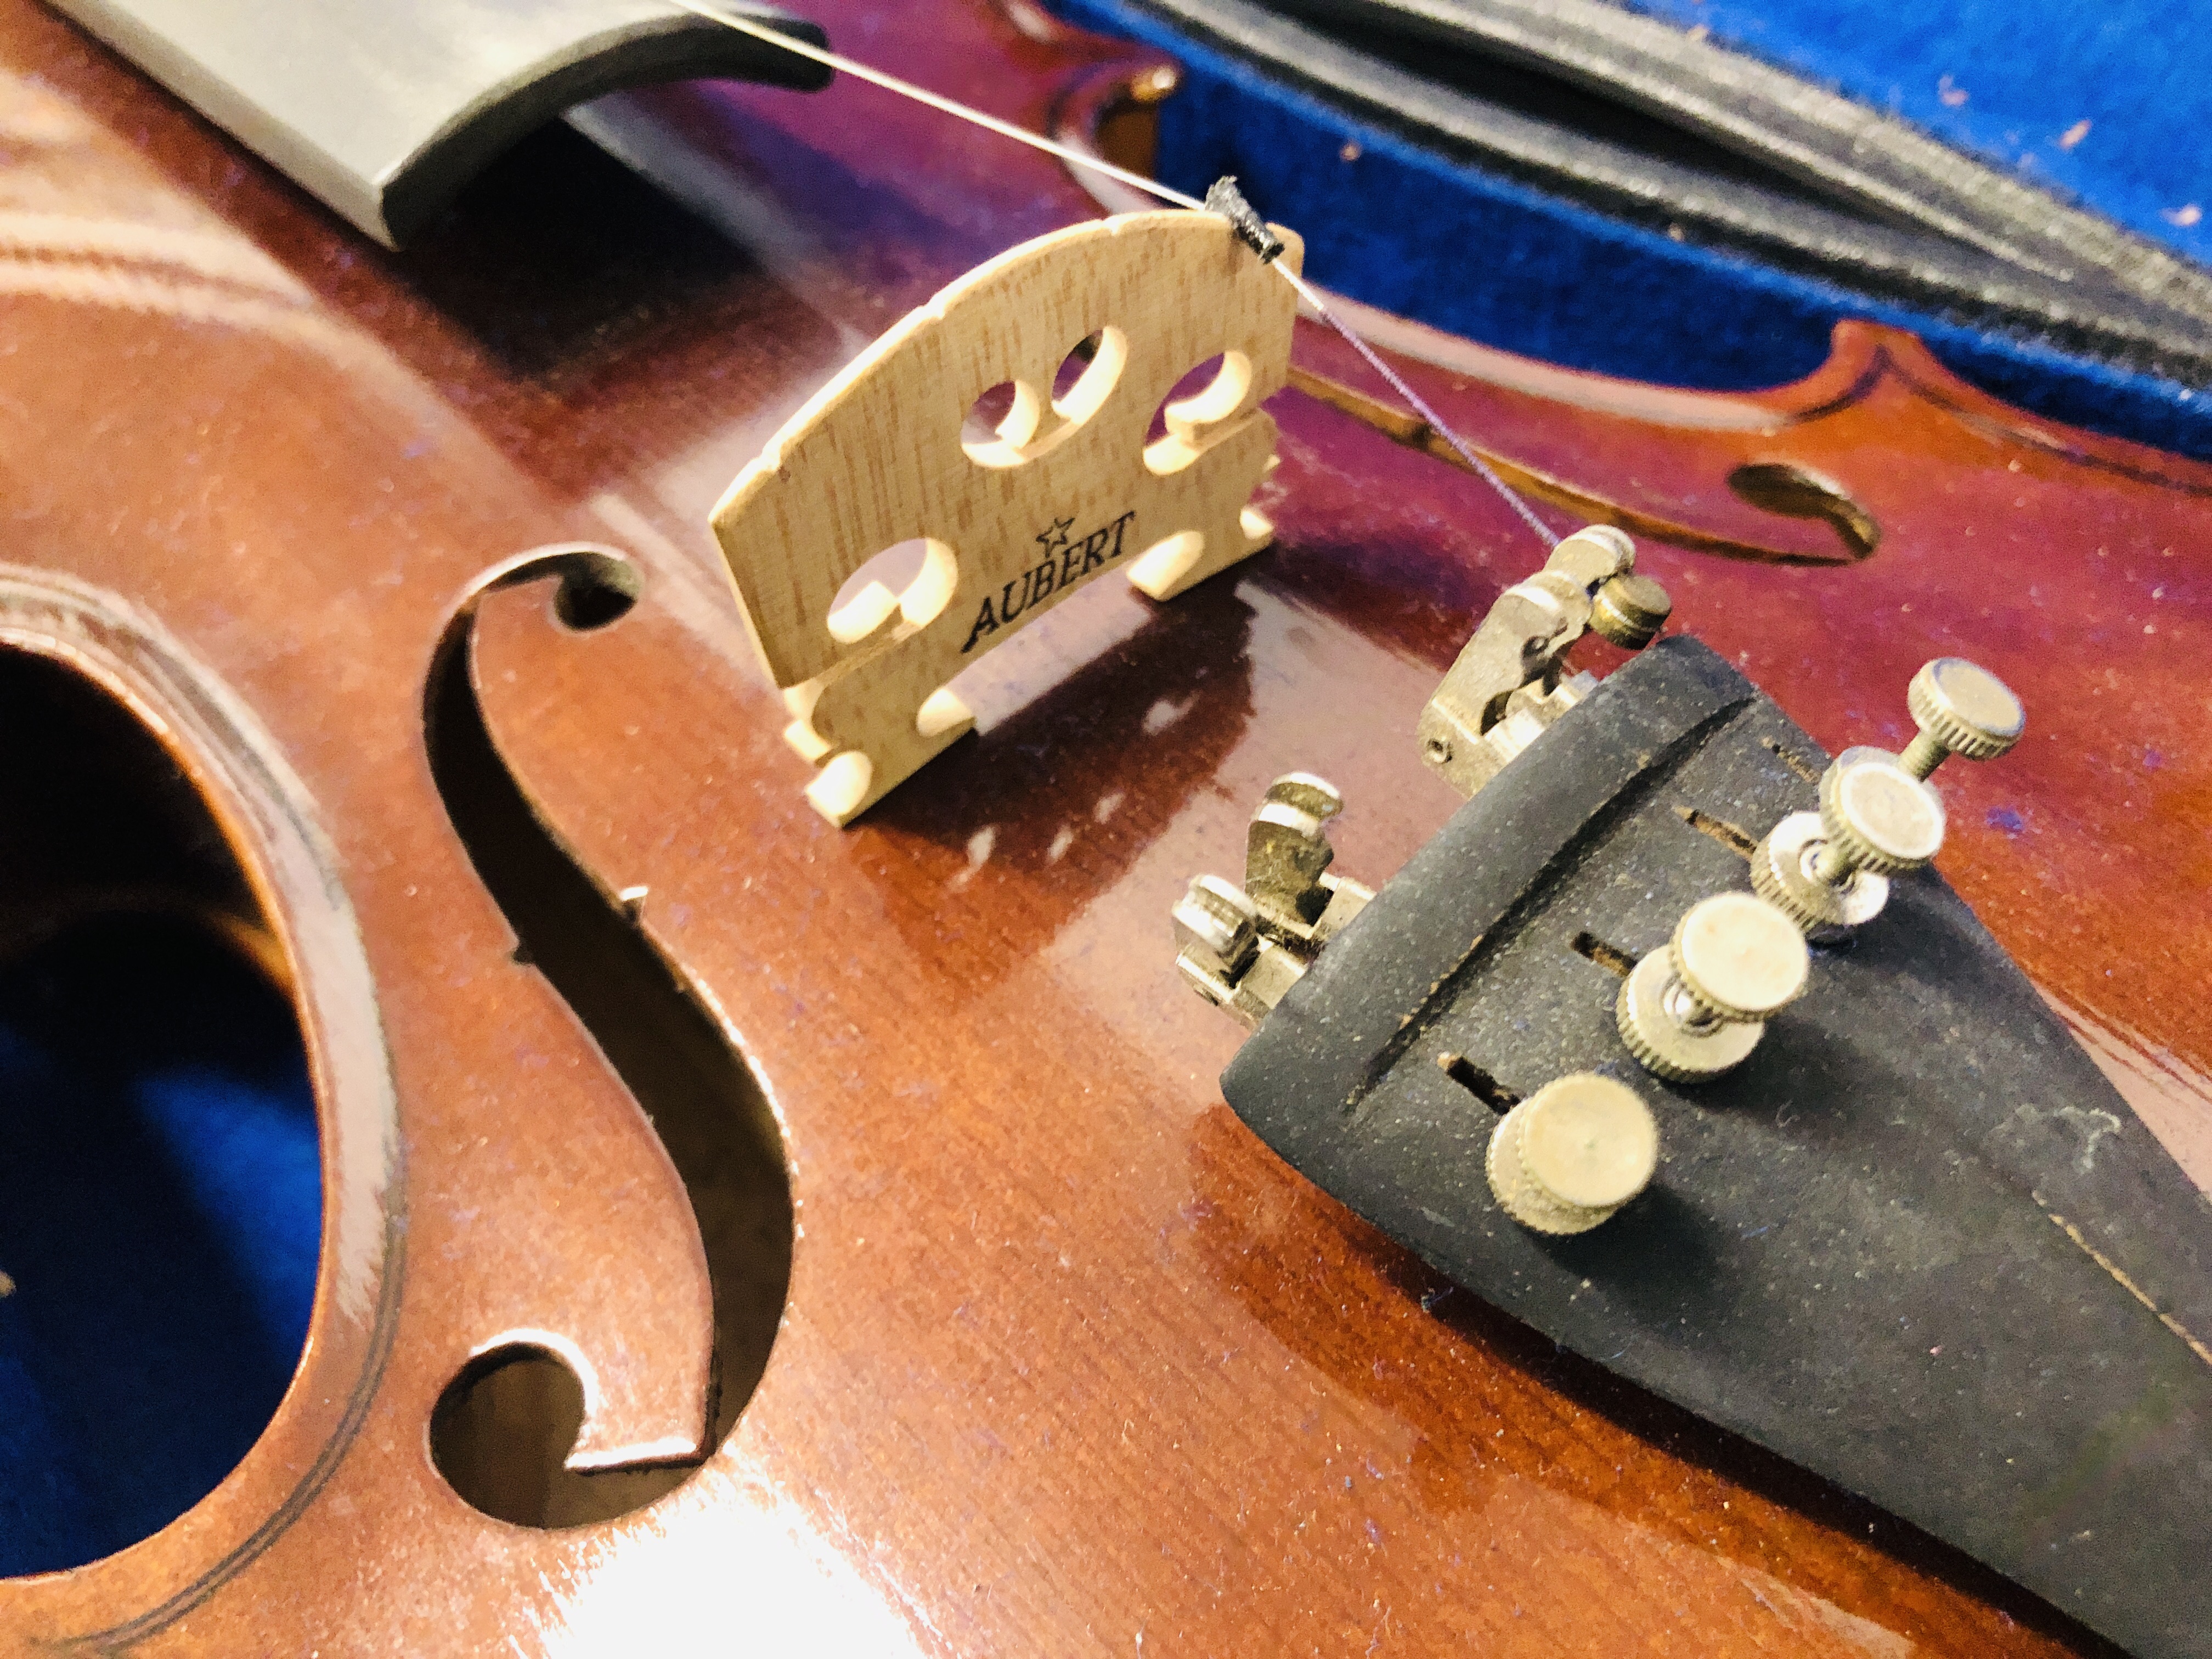 4 X VINTAGE VIOLINS AND 2 WOODEN CASES, VARIOUS BOWS (NO STRINGS) FOR RESTORATION. - Image 9 of 20